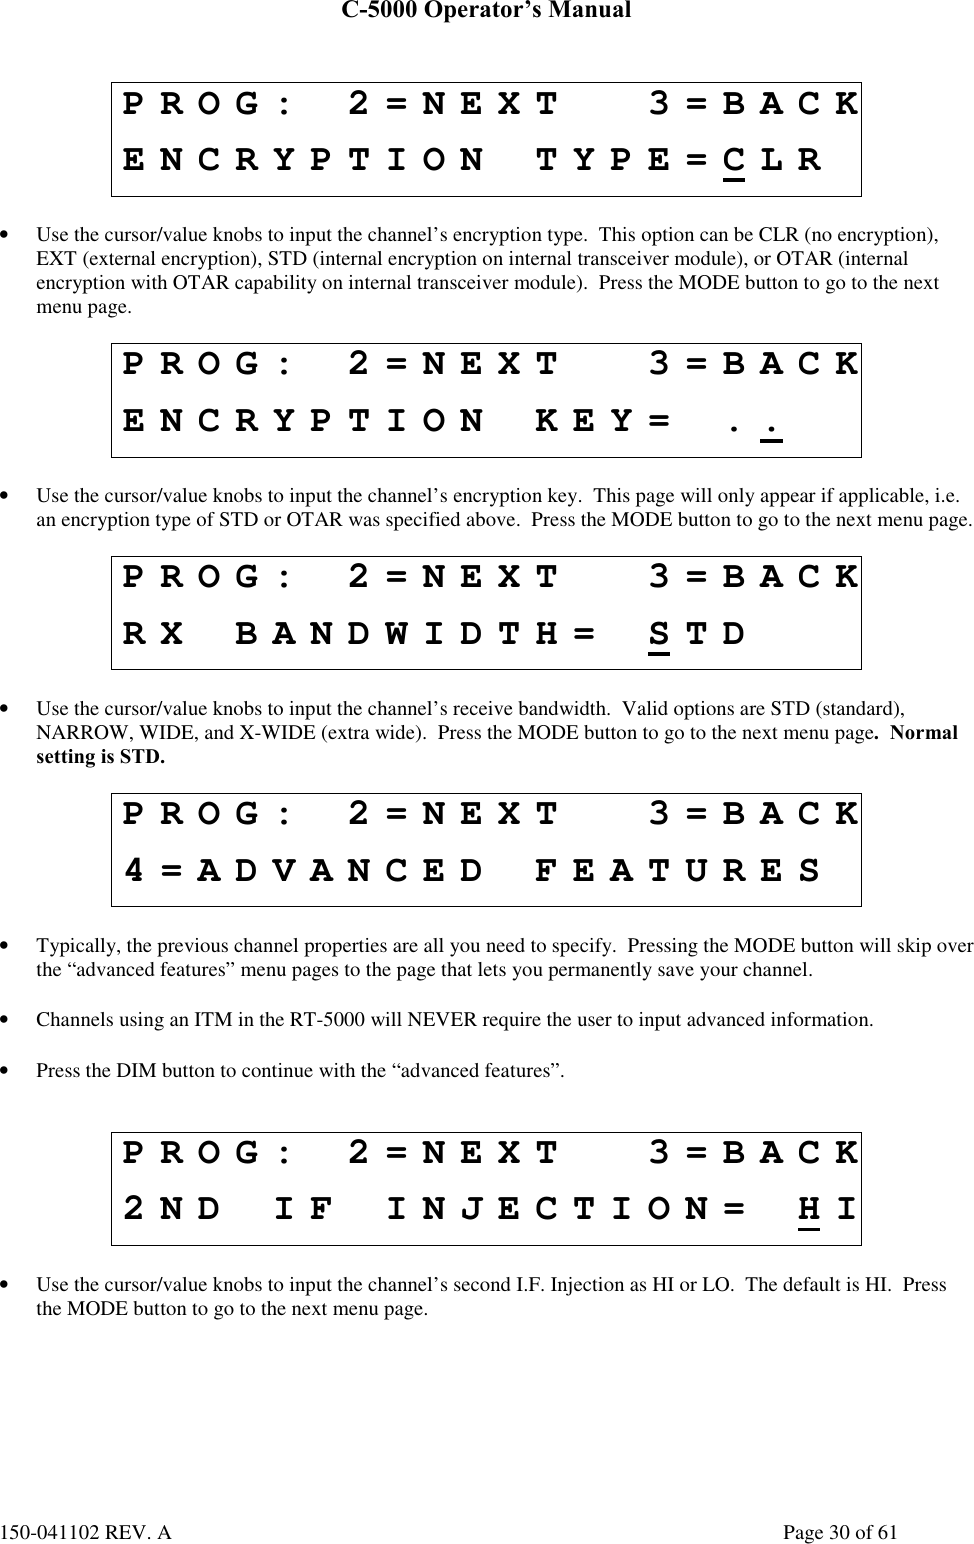 C-5000 Operator’s Manual150-041102 REV. A Page 30 of 61PROG: 2=NEXT 3=BACKENCRYPTION TYPE=CLR• Use the cursor/value knobs to input the channel’s encryption type.  This option can be CLR (no encryption),EXT (external encryption), STD (internal encryption on internal transceiver module), or OTAR (internalencryption with OTAR capability on internal transceiver module).  Press the MODE button to go to the nextmenu page.PROG: 2=NEXT 3=BACKENCRYPTION KEY= ..• Use the cursor/value knobs to input the channel’s encryption key.  This page will only appear if applicable, i.e.an encryption type of STD or OTAR was specified above.  Press the MODE button to go to the next menu page.PROG: 2=NEXT 3=BACKRX BANDWIDTH= STD• Use the cursor/value knobs to input the channel’s receive bandwidth.  Valid options are STD (standard),NARROW, WIDE, and X-WIDE (extra wide).  Press the MODE button to go to the next menu page.  Normalsetting is STD.PROG: 2=NEXT 3=BACK4=ADVANCED FEATURES• Typically, the previous channel properties are all you need to specify.  Pressing the MODE button will skip overthe “advanced features” menu pages to the page that lets you permanently save your channel.• Channels using an ITM in the RT-5000 will NEVER require the user to input advanced information.• Press the DIM button to continue with the “advanced features”.PROG: 2=NEXT 3=BACK2ND IF INJECTION= HI• Use the cursor/value knobs to input the channel’s second I.F. Injection as HI or LO.  The default is HI.  Pressthe MODE button to go to the next menu page.